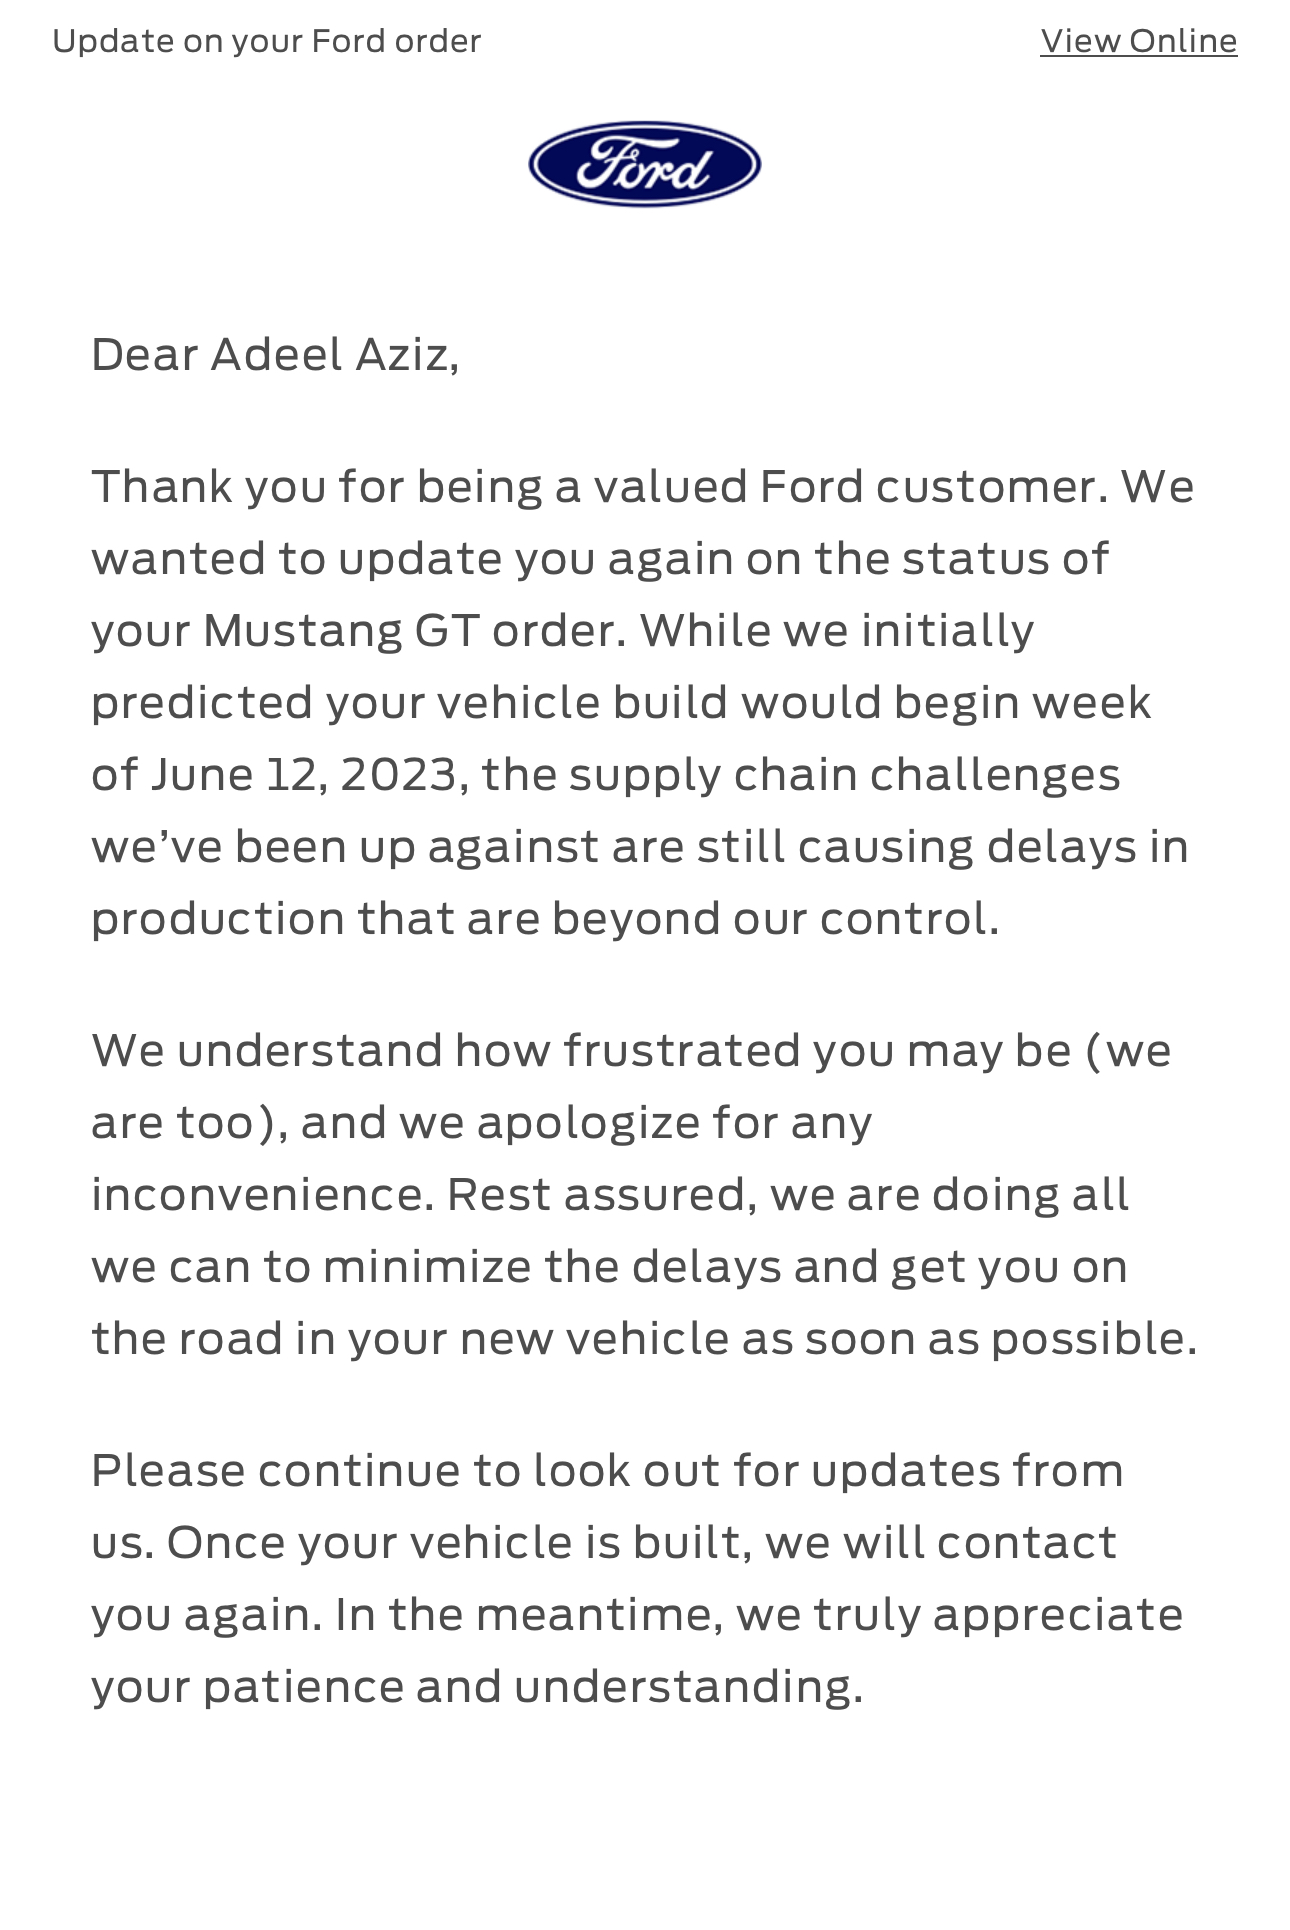 S650 Mustang Ford status update promise is more infuriating than comforting. IMG_1879